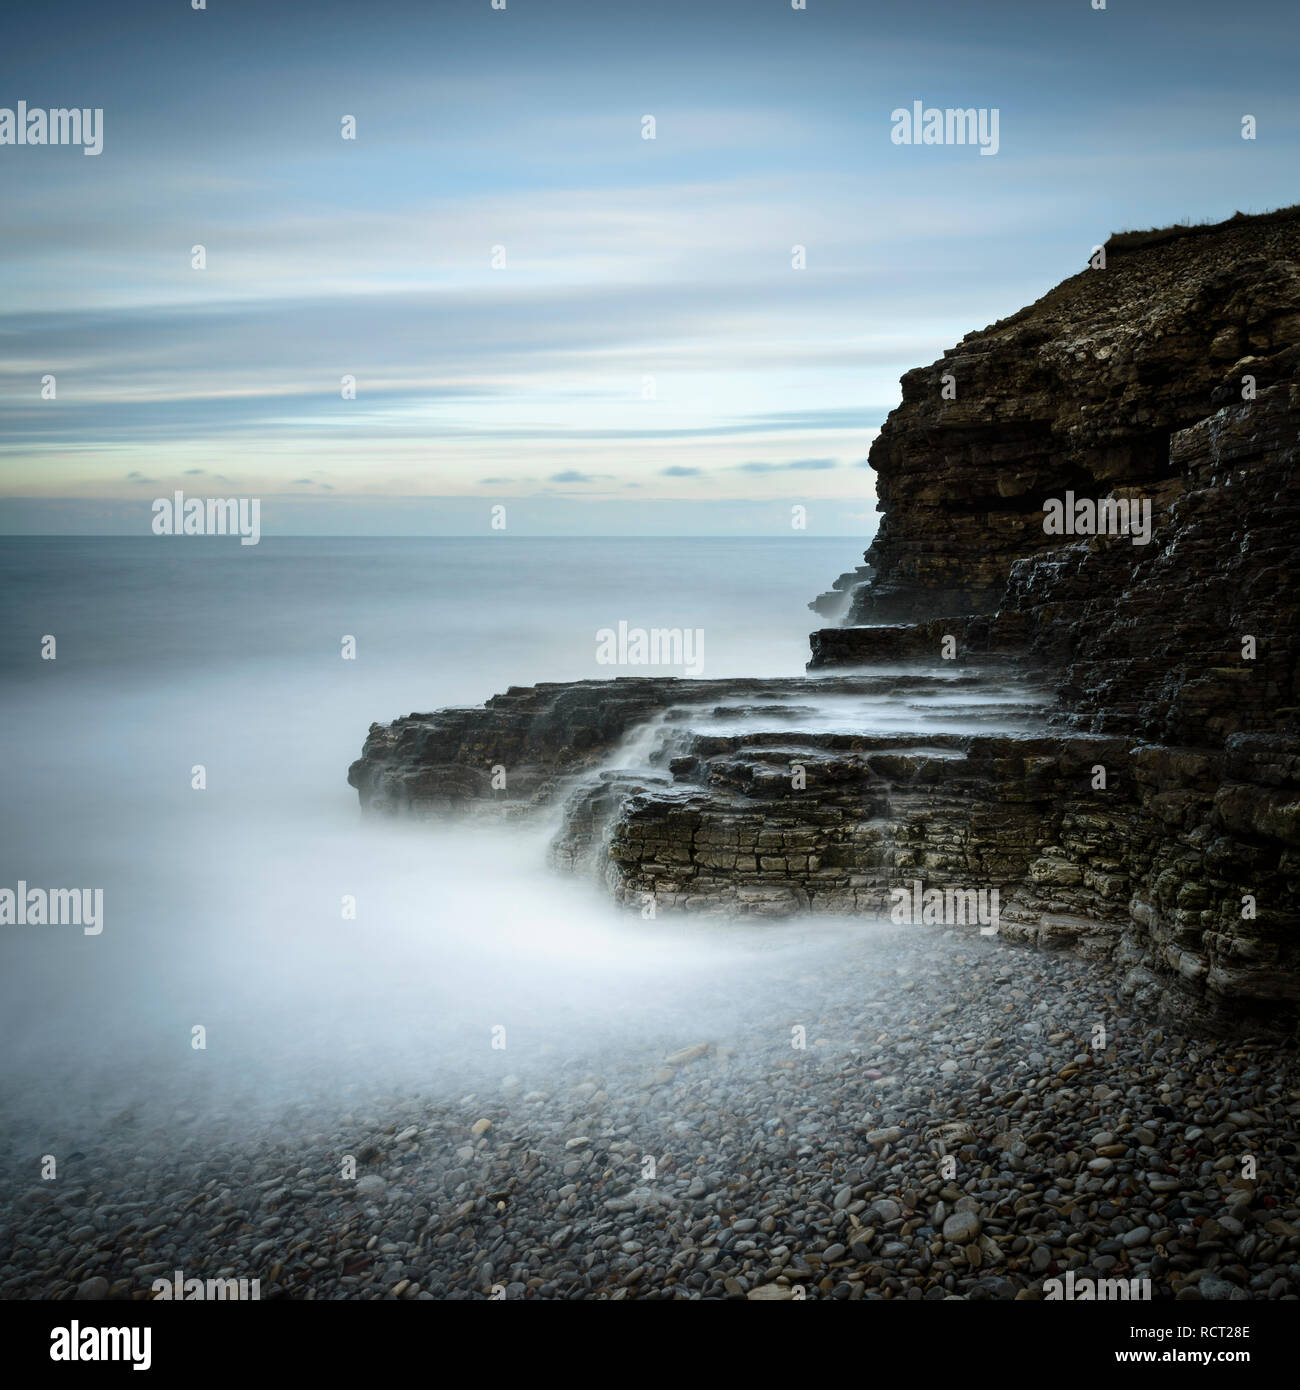 Wonderful ambient light created conditions for this long exposure of the cliffs, pebble beach and the streams of cascading water at Souter Lighthouse Stock Photo